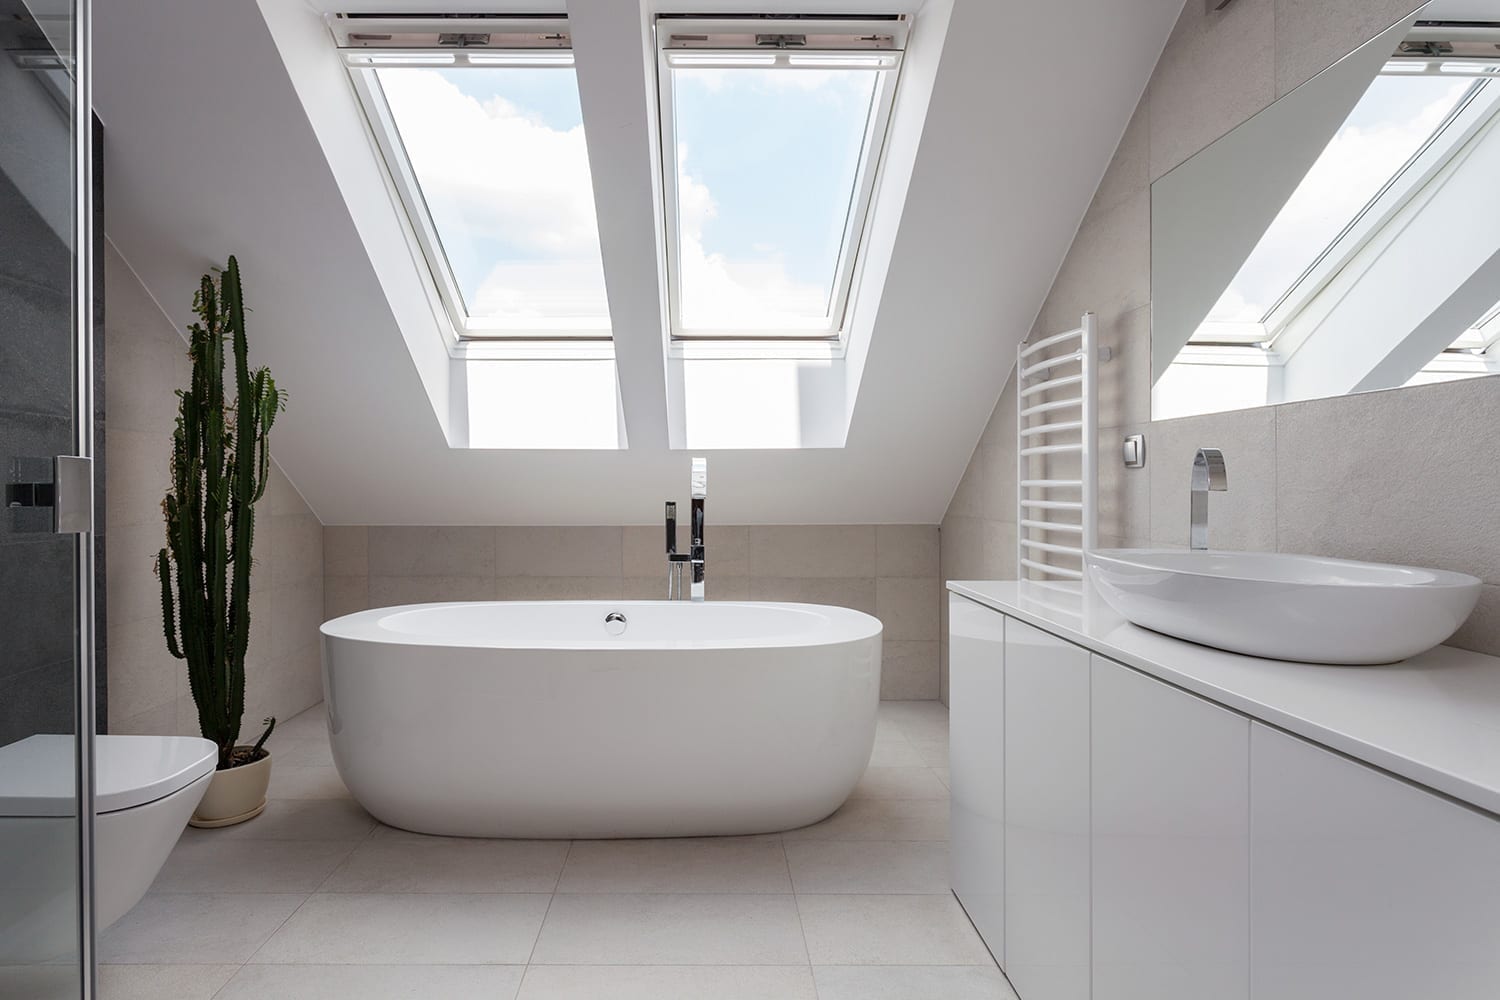 two skylights in ceiling of modern white bathroom